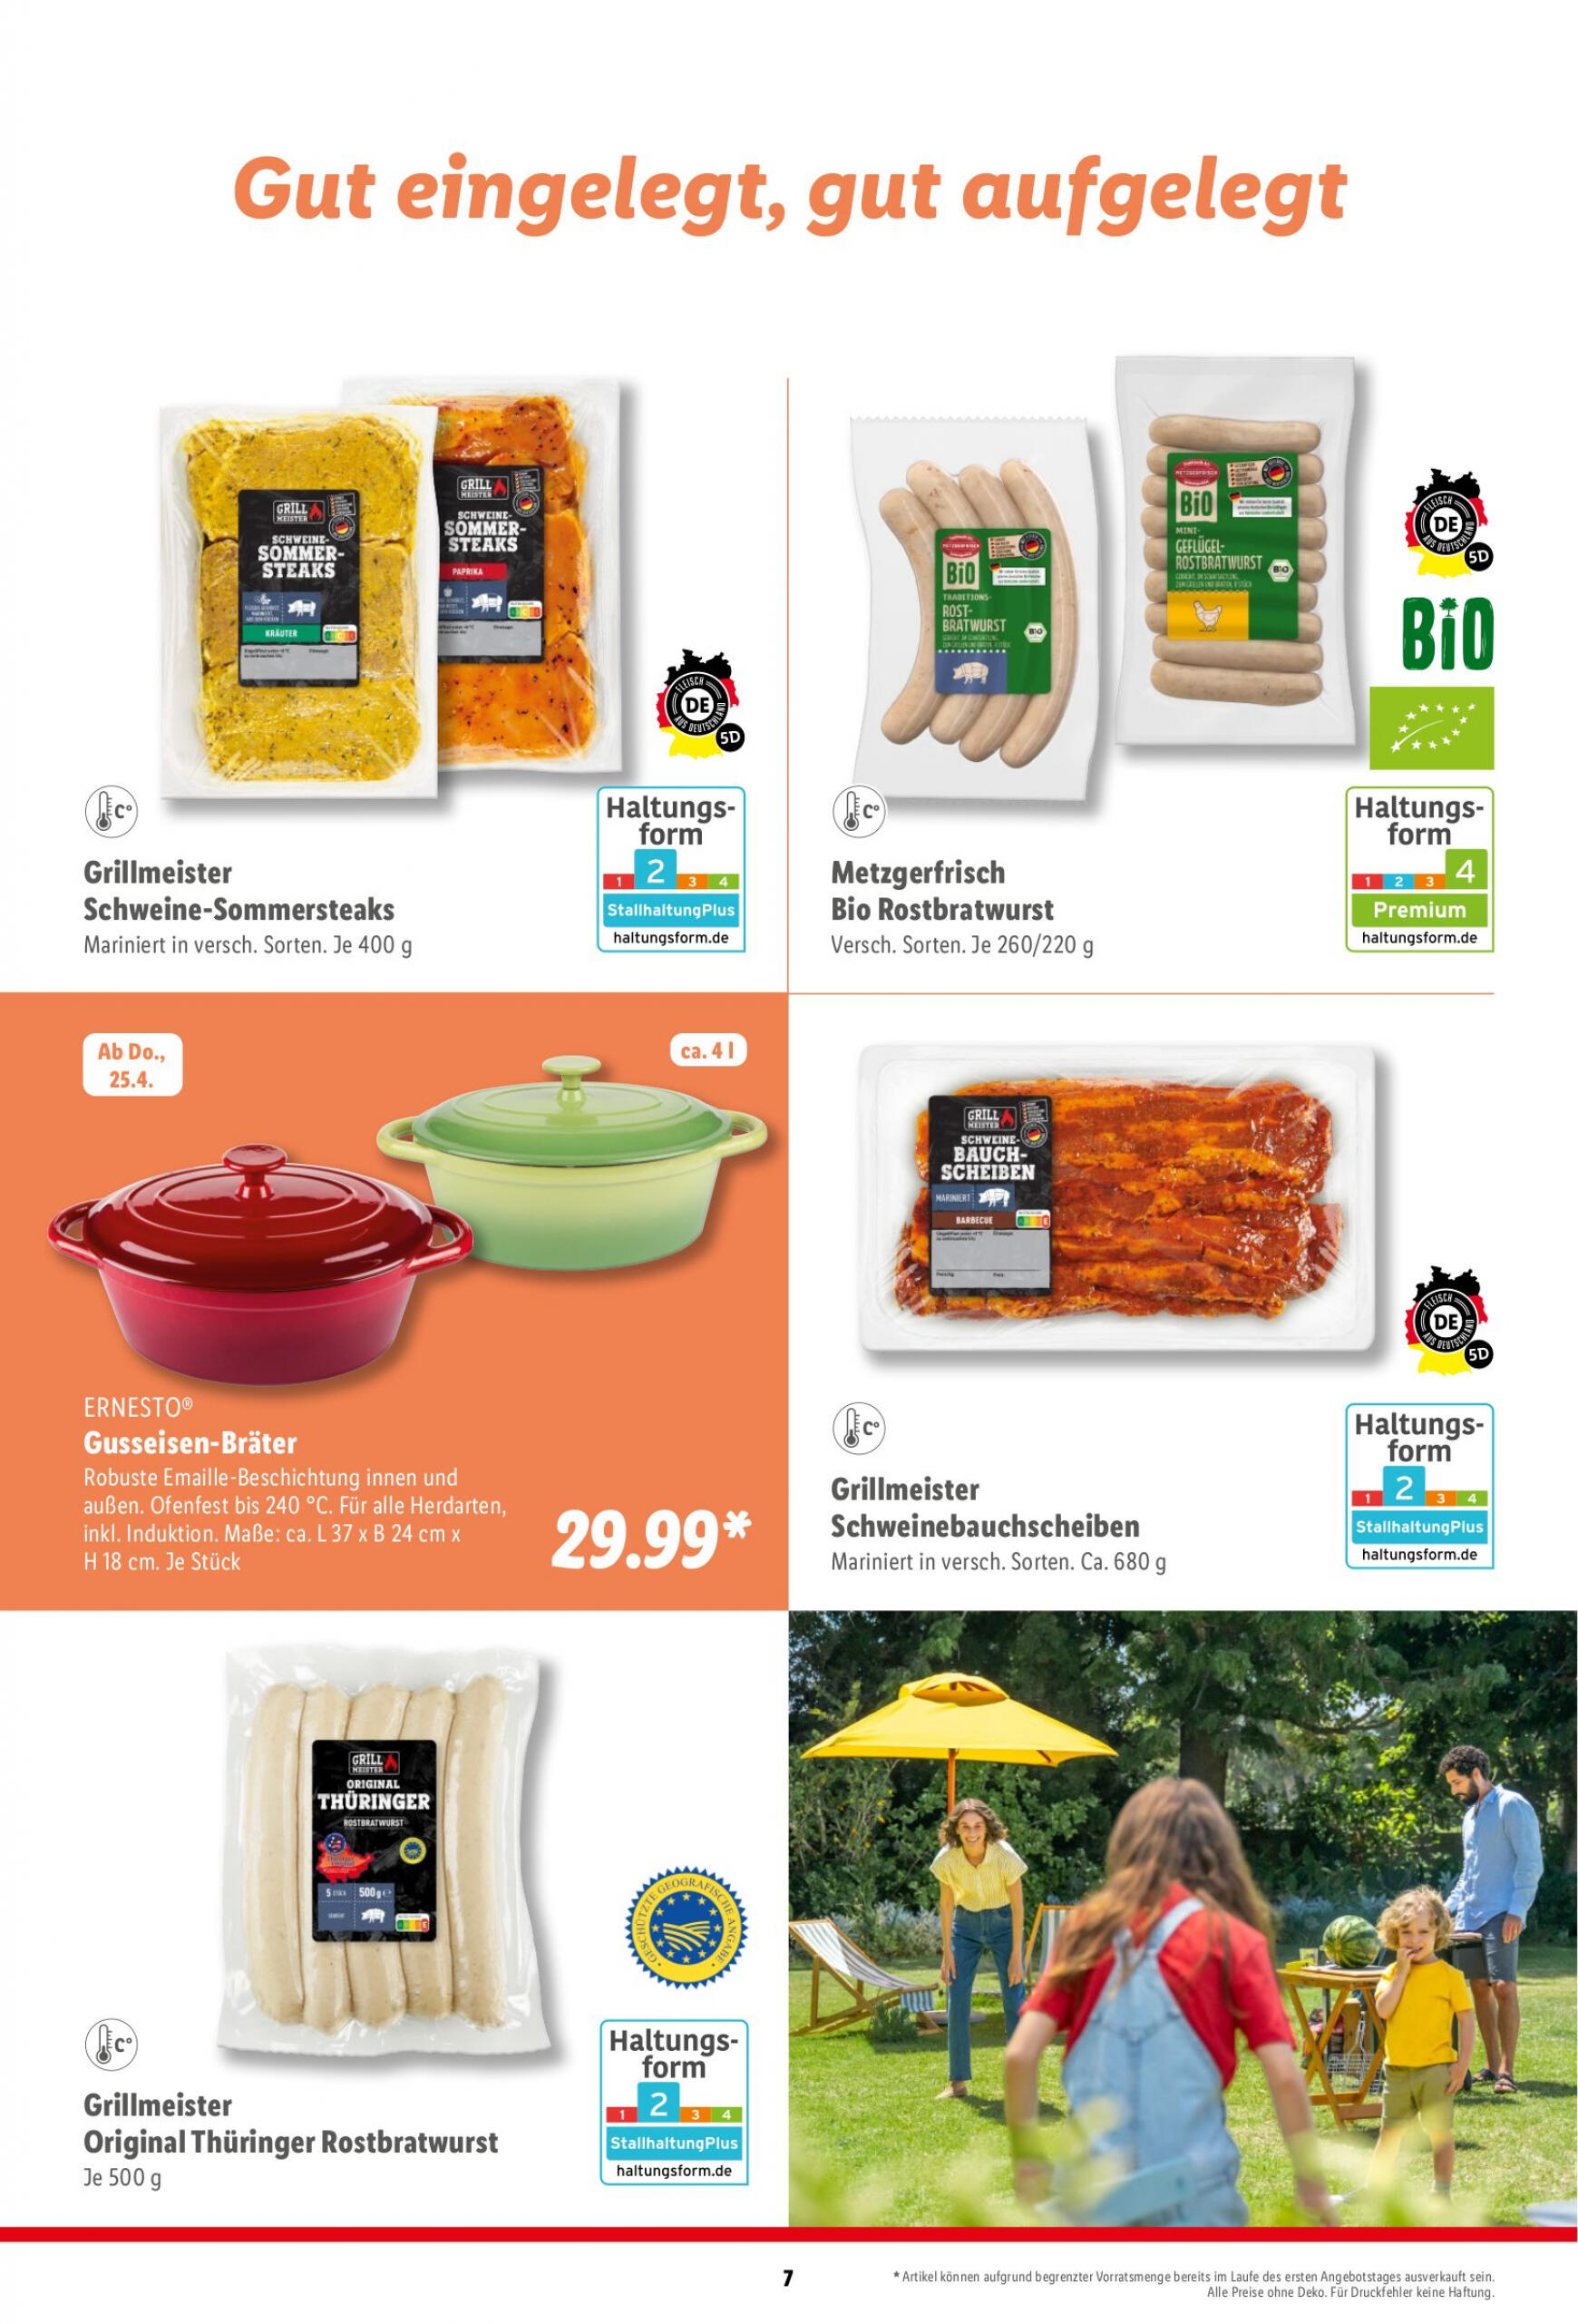 lidl - Flyer Lidl - Grillmagazin aktuell 22.04. - 30.06. - page: 7